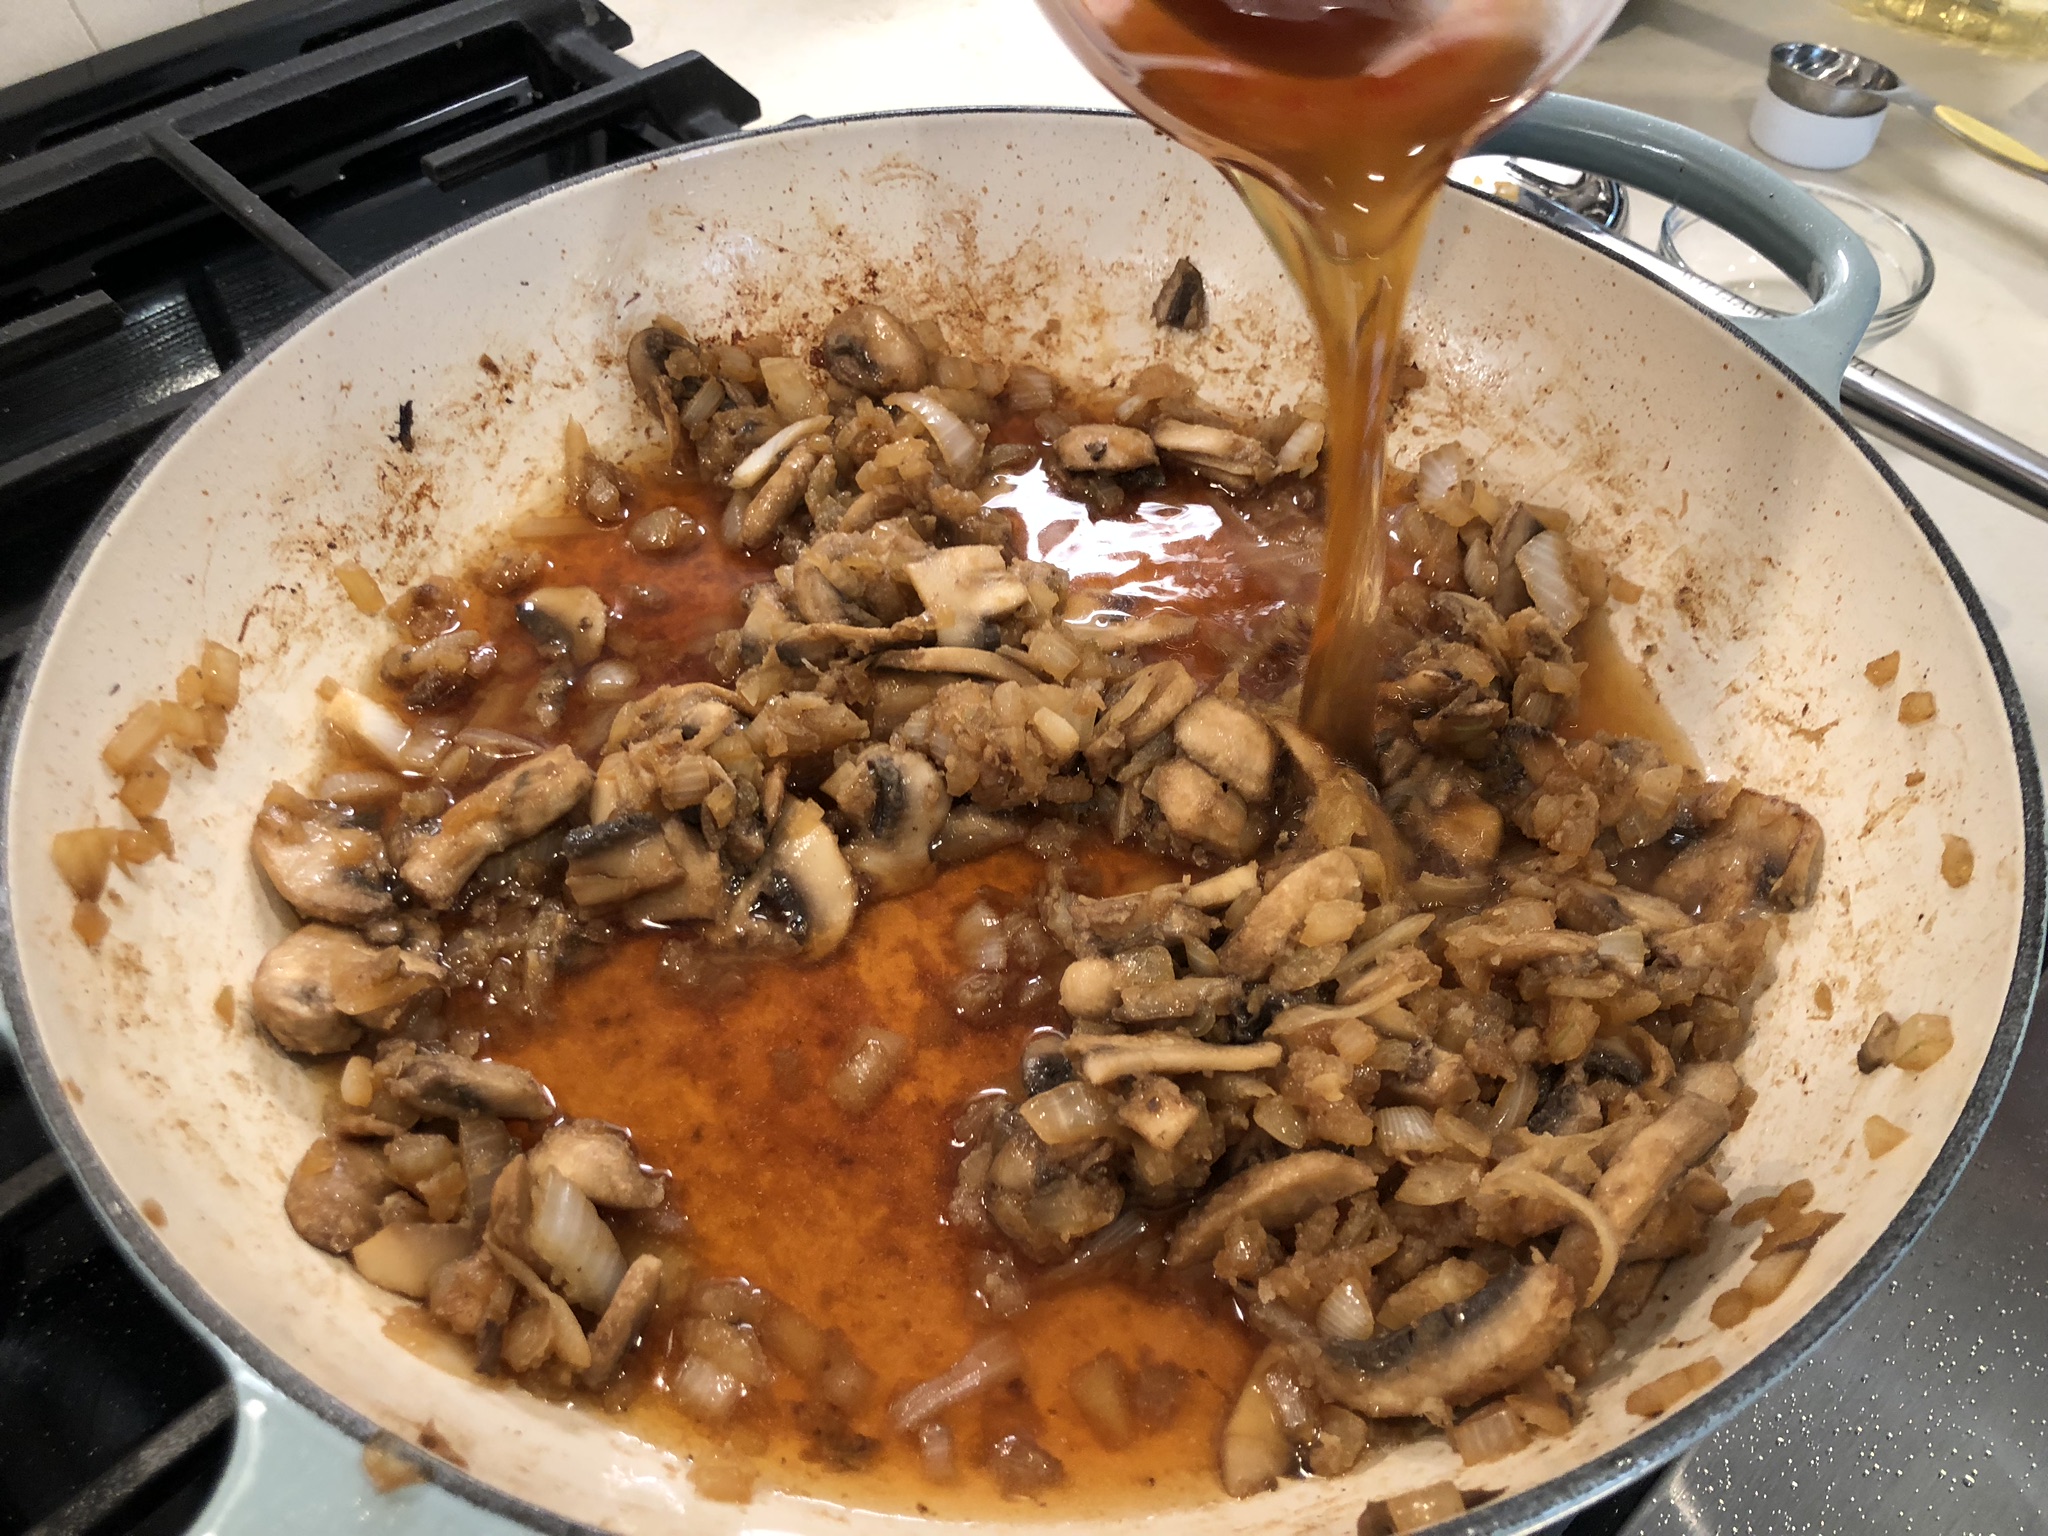 Pouring One and a Half Cups of Low-Sodium Beef Broth into Beef Stroganoff Recipe